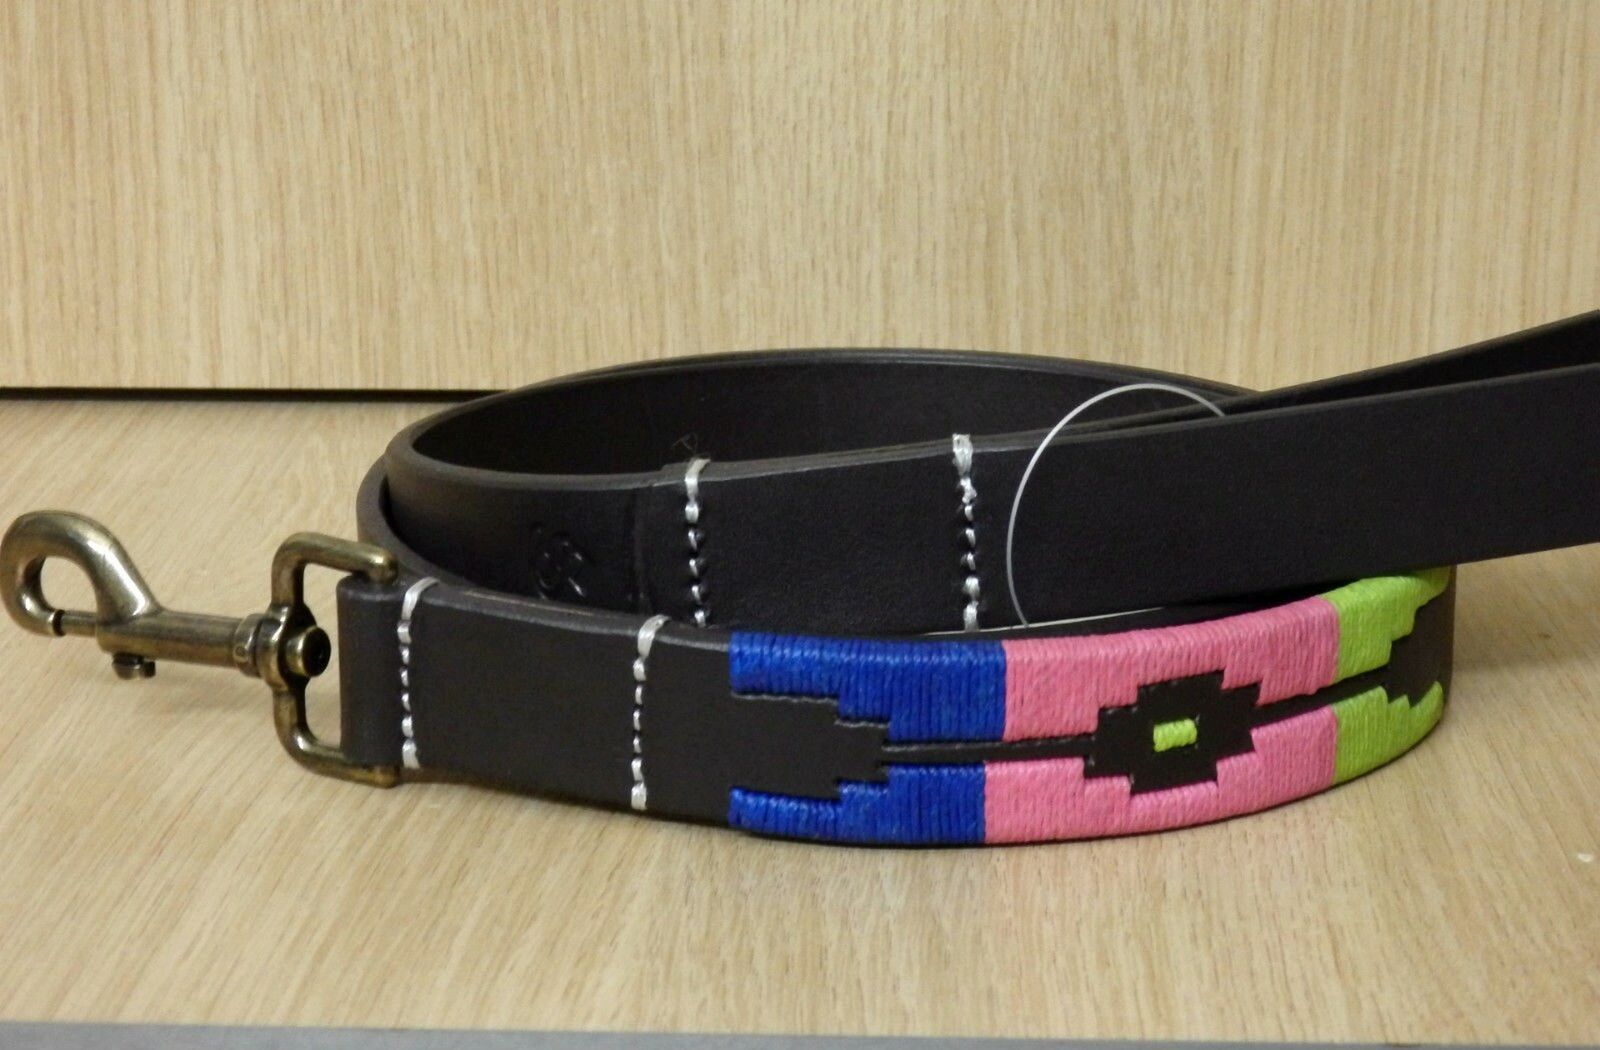 Shires Equestrian Moreno Polo Leather Dog Collar Stitched with Brass Fittings